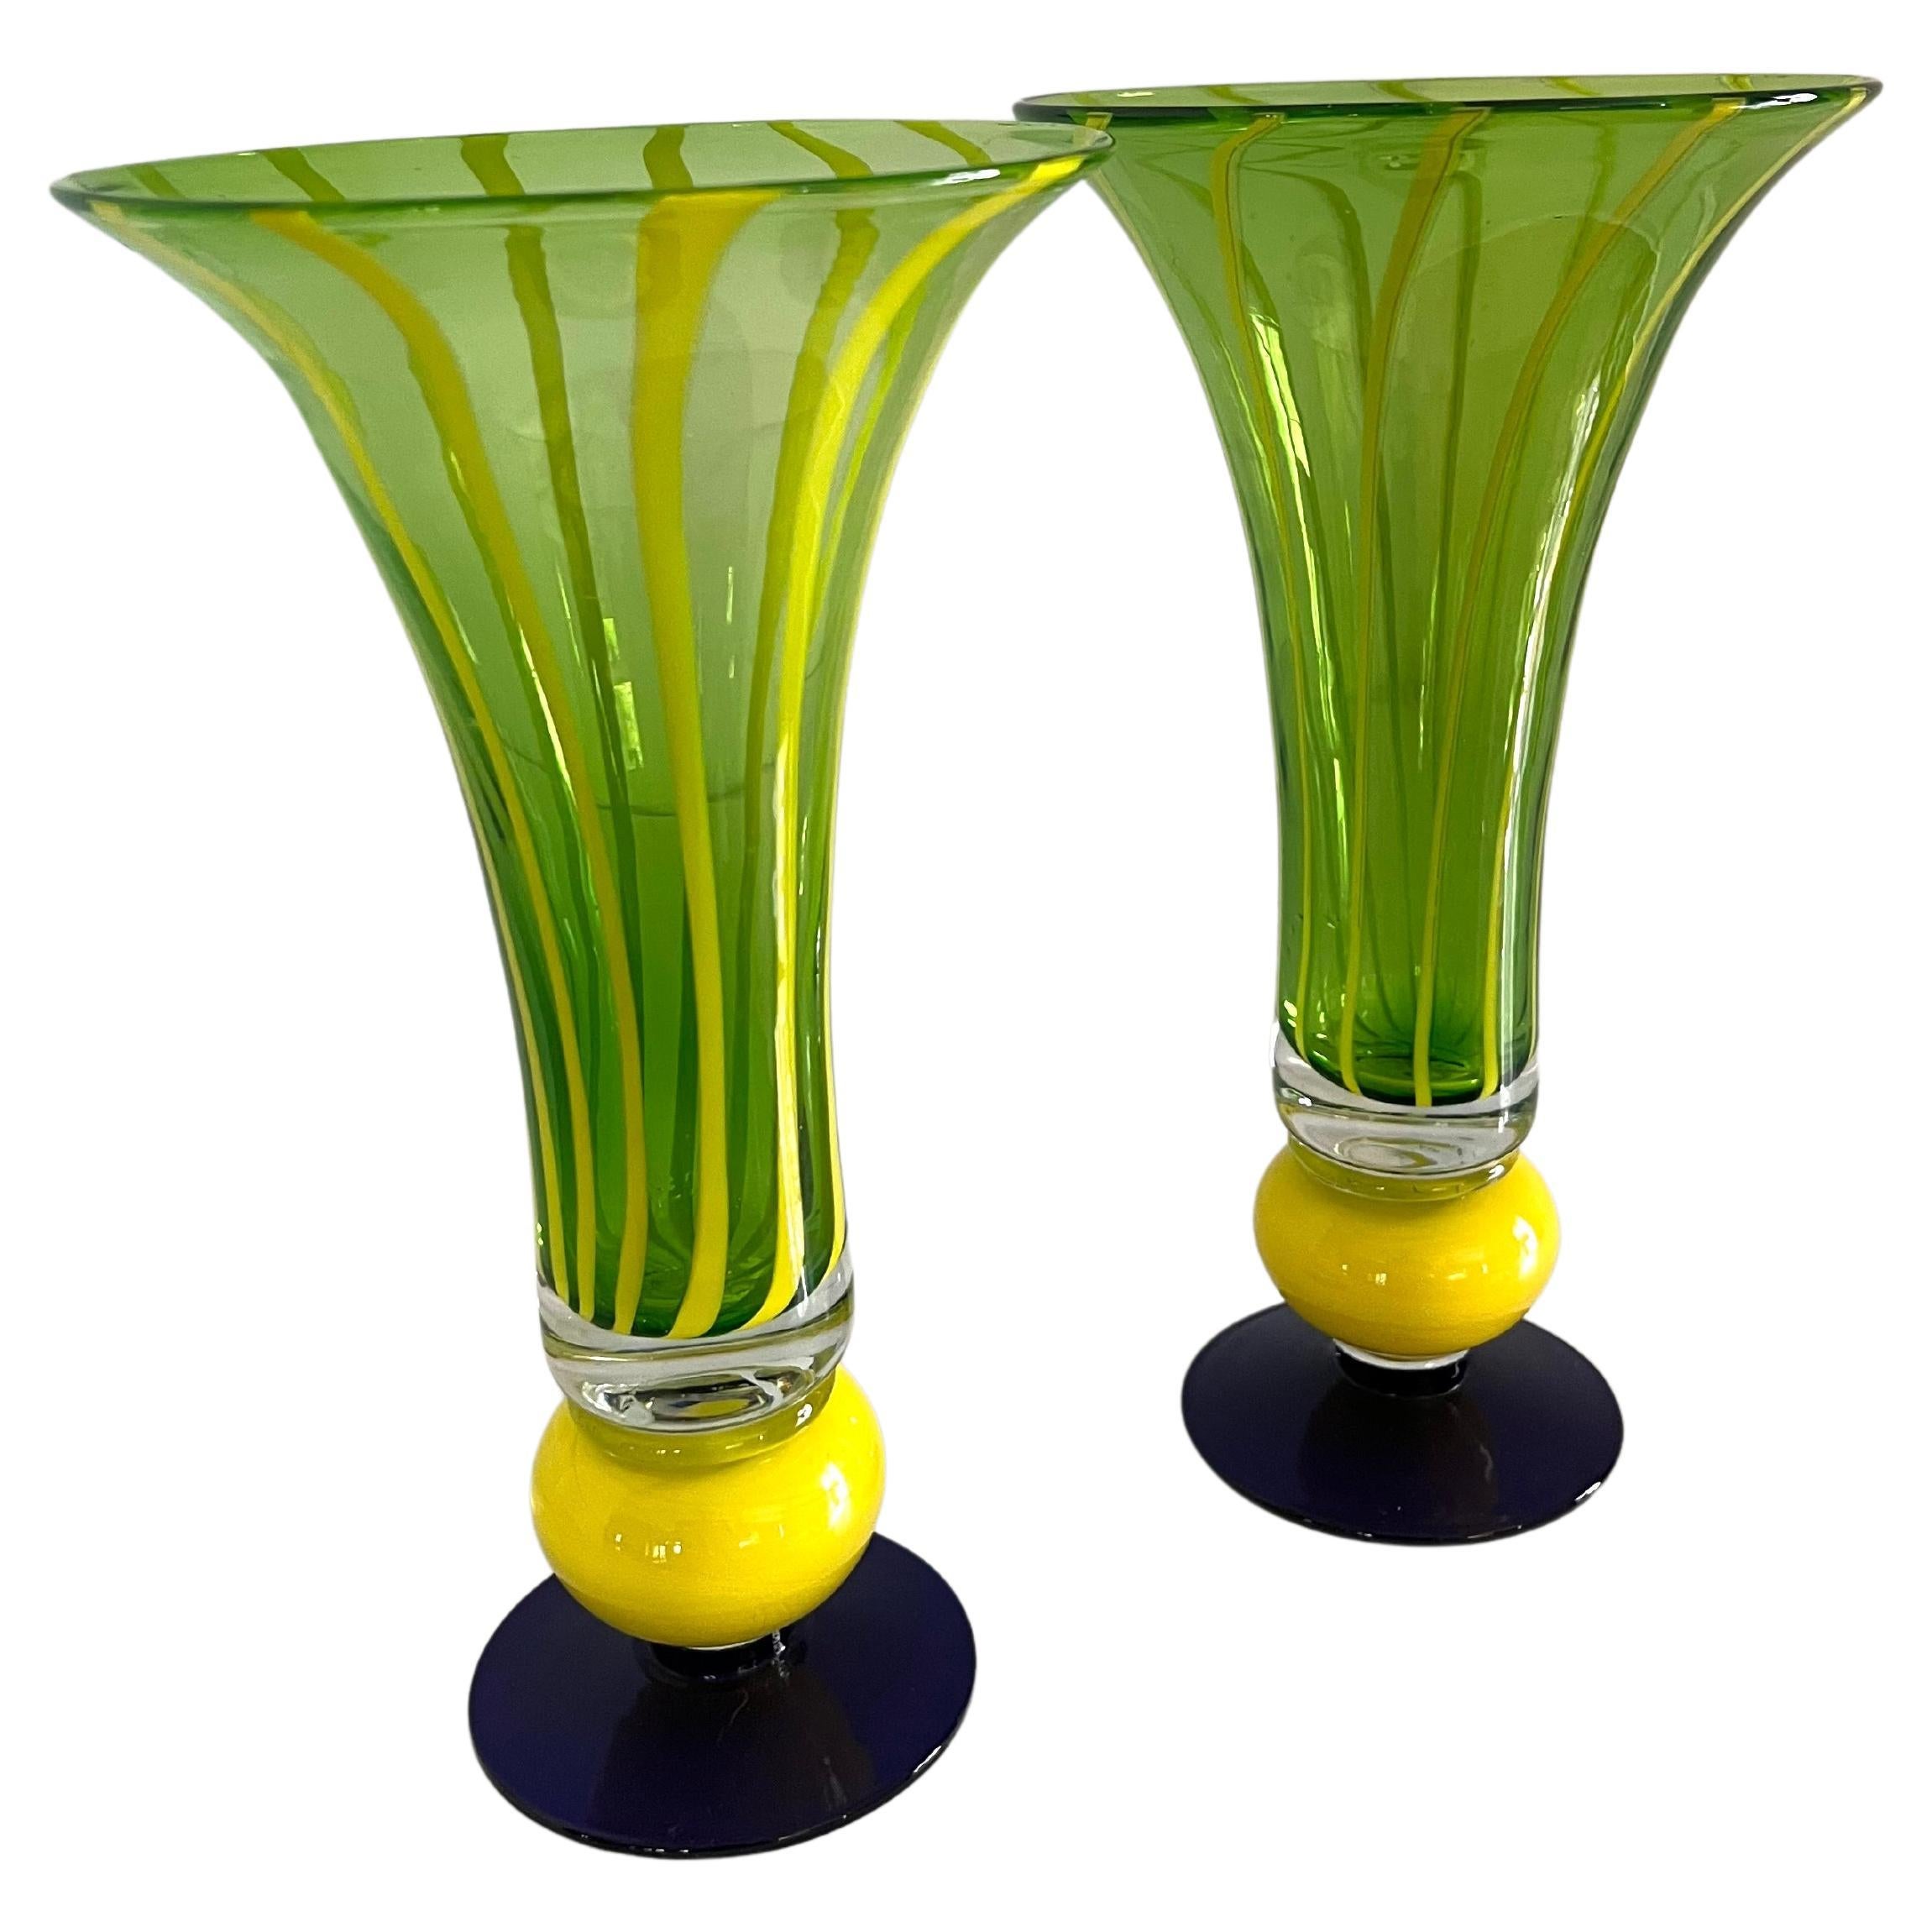 Pair of trumpet glass vases with blue base, yellow ball detail, and green and yellow striped body. A complement to living and dining rooms, or perhaps to bring additional color to the garden.